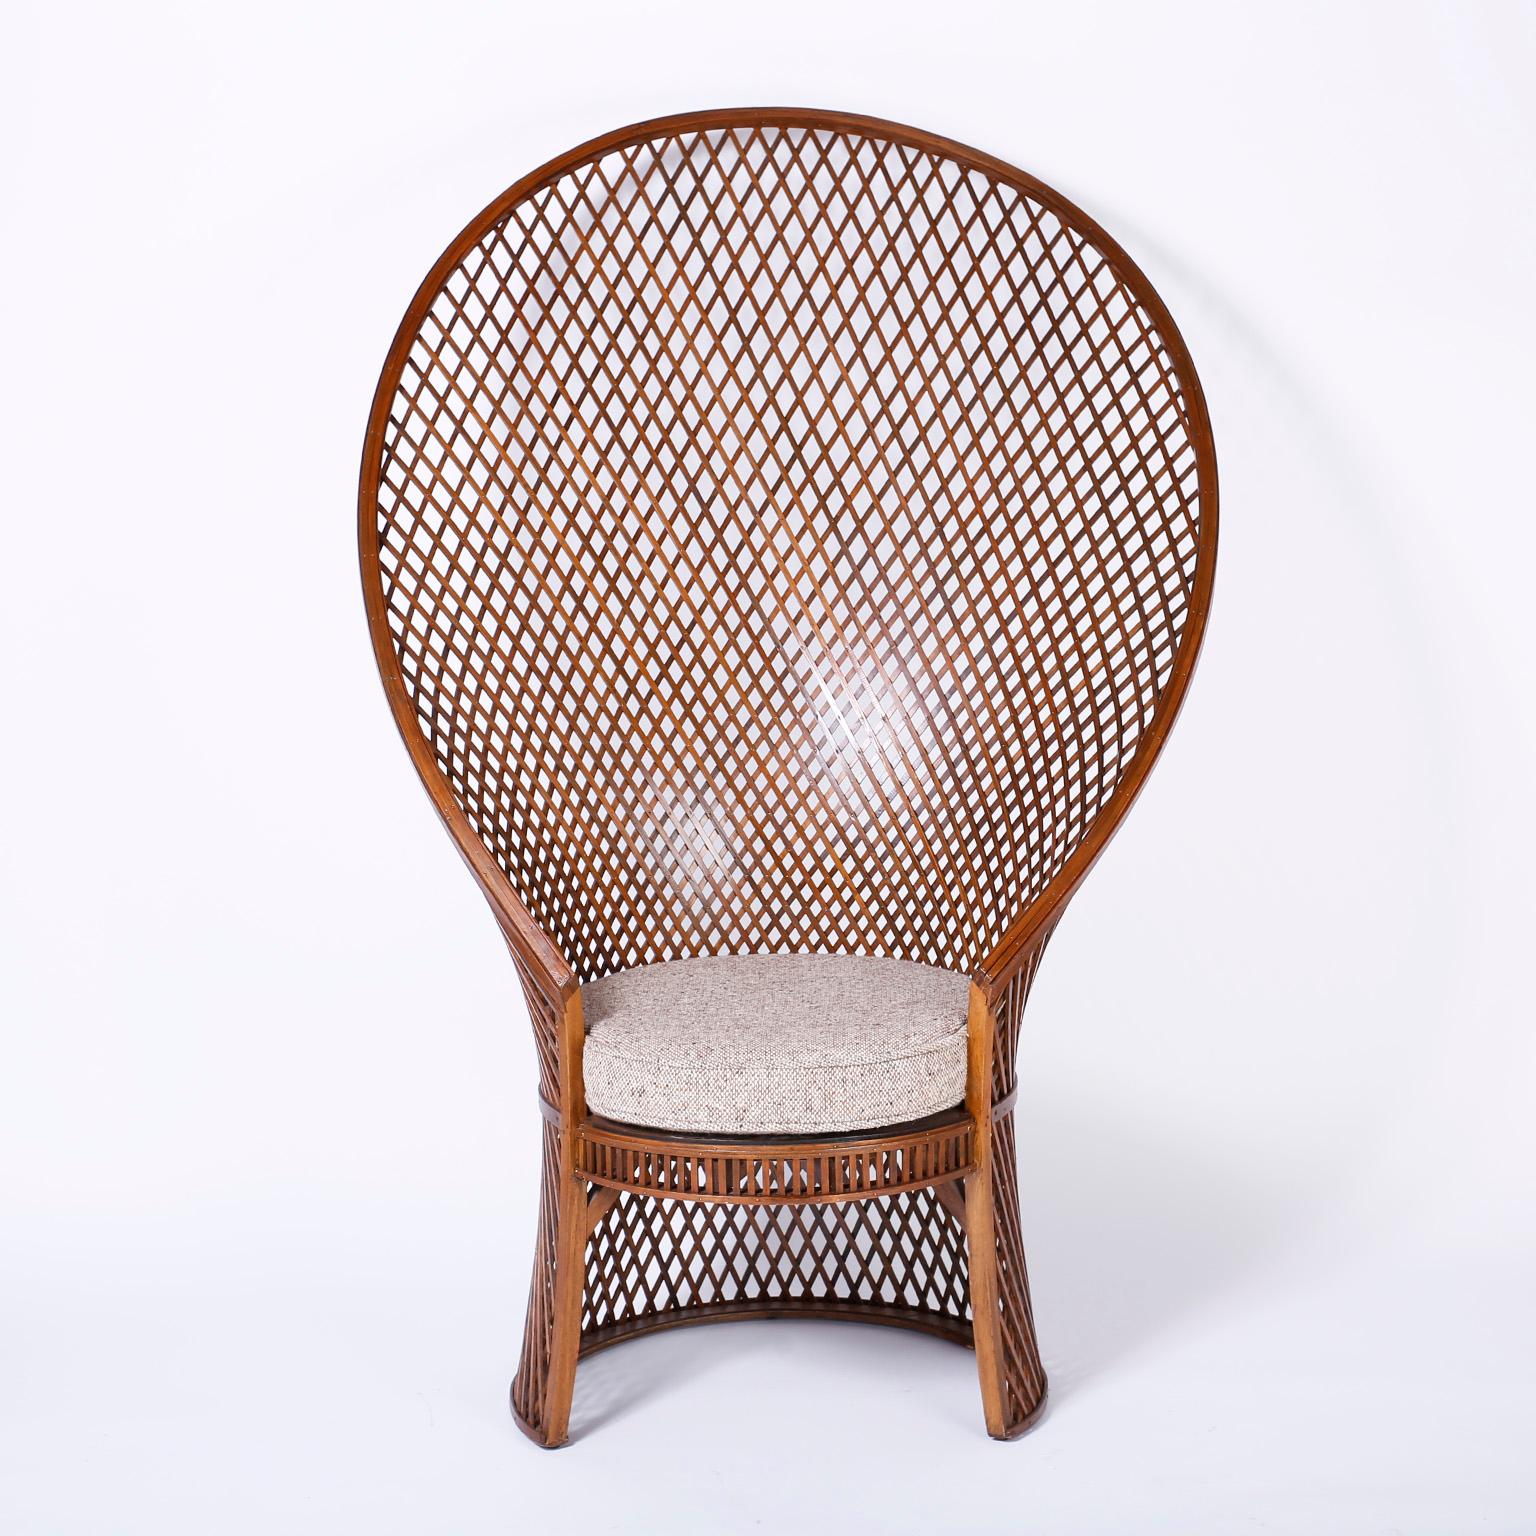 Rare vintage refined peacock chair, wicker or rattan at first glance, but actually crafted in walnut with an elegant and ambitious pattern of wood strips held together with brass brads. Signed McGuire on the bottom.